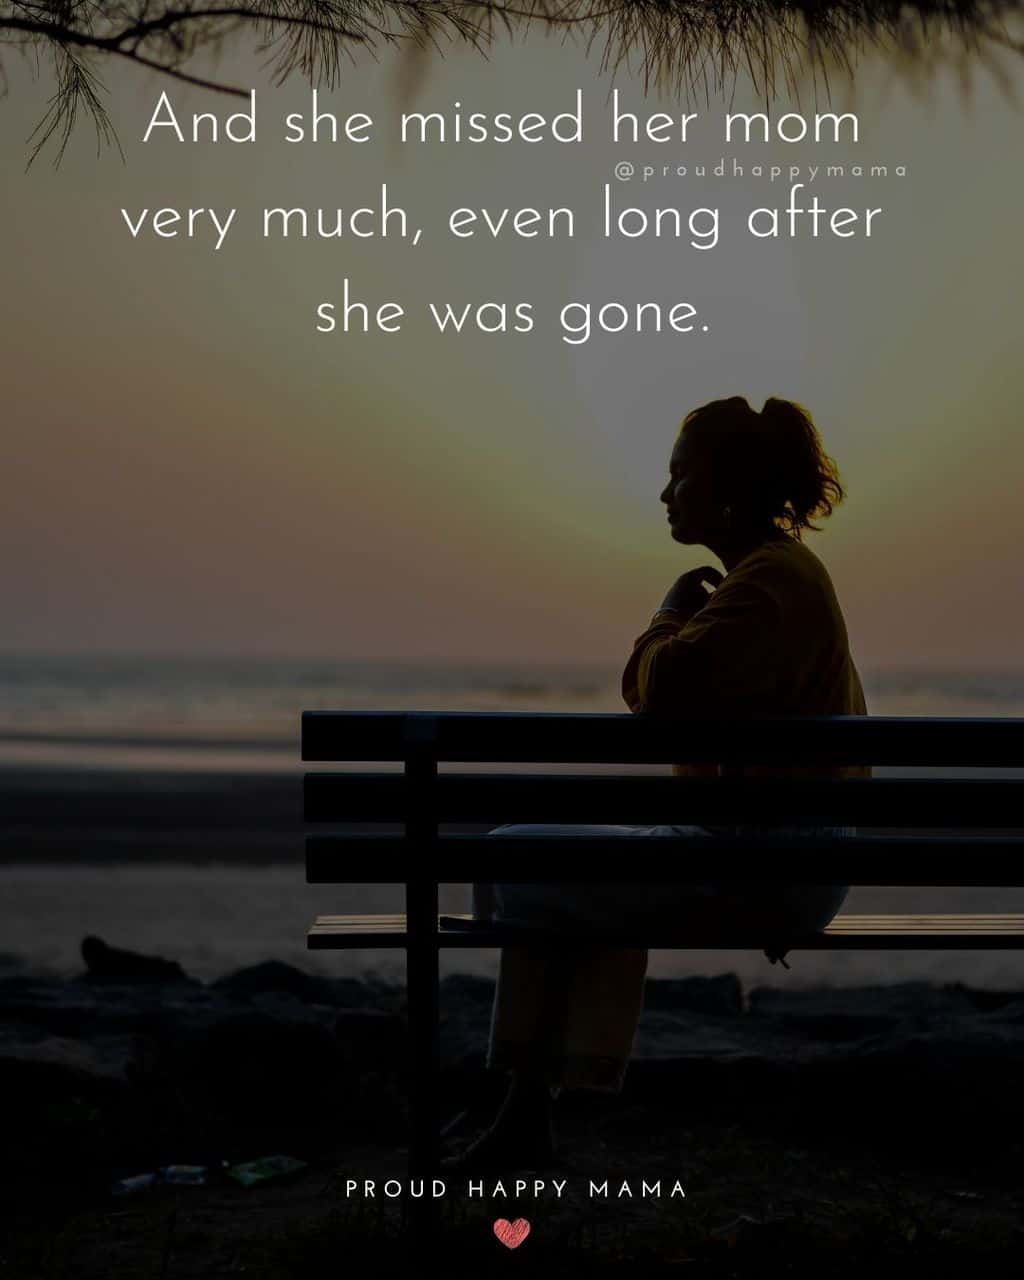 Woman sitting on bench near the ocean missing her mom. With text overlay 'And she missed her mom very much, even long after she was gone.’